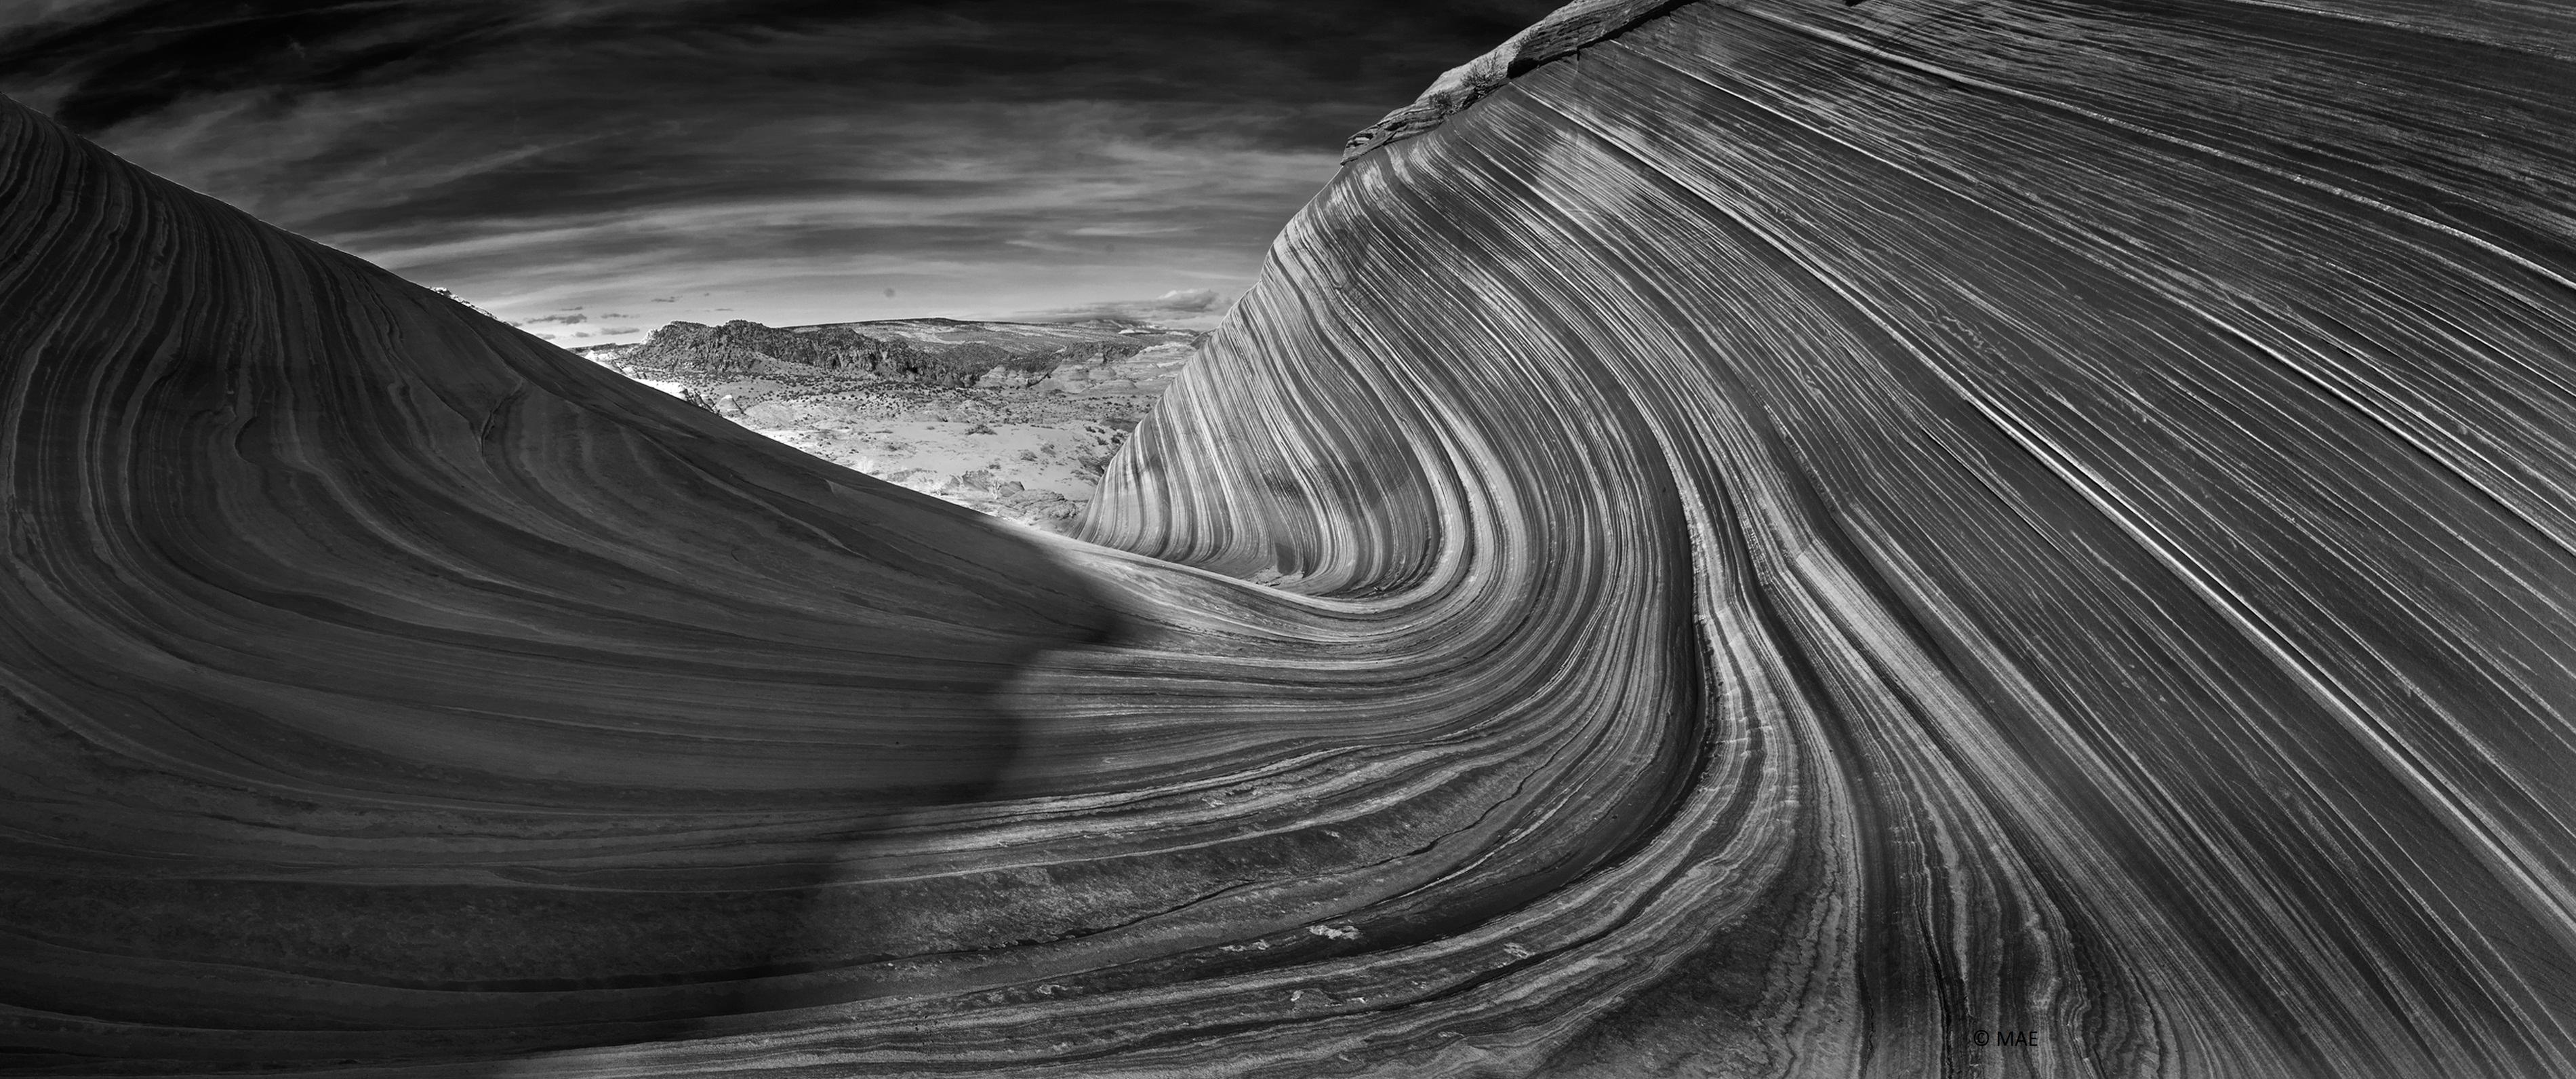 Black and White Photography of American landscape series 